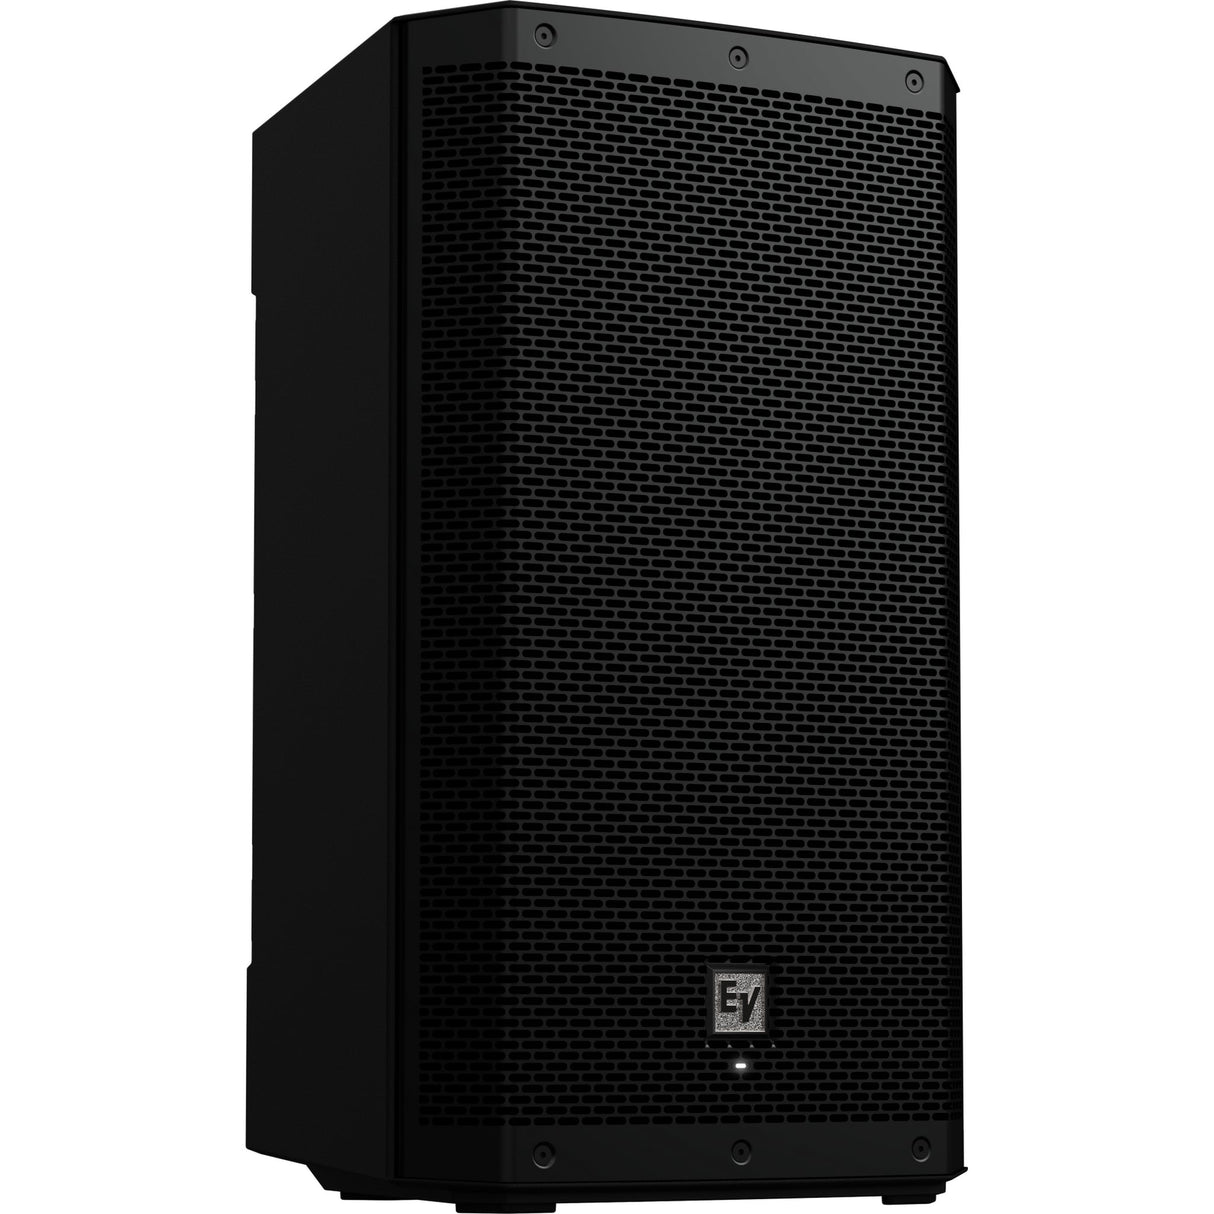 Electro-Voice ZLX-12P-G2 12-Inch 2-Way Powered Loudspeaker